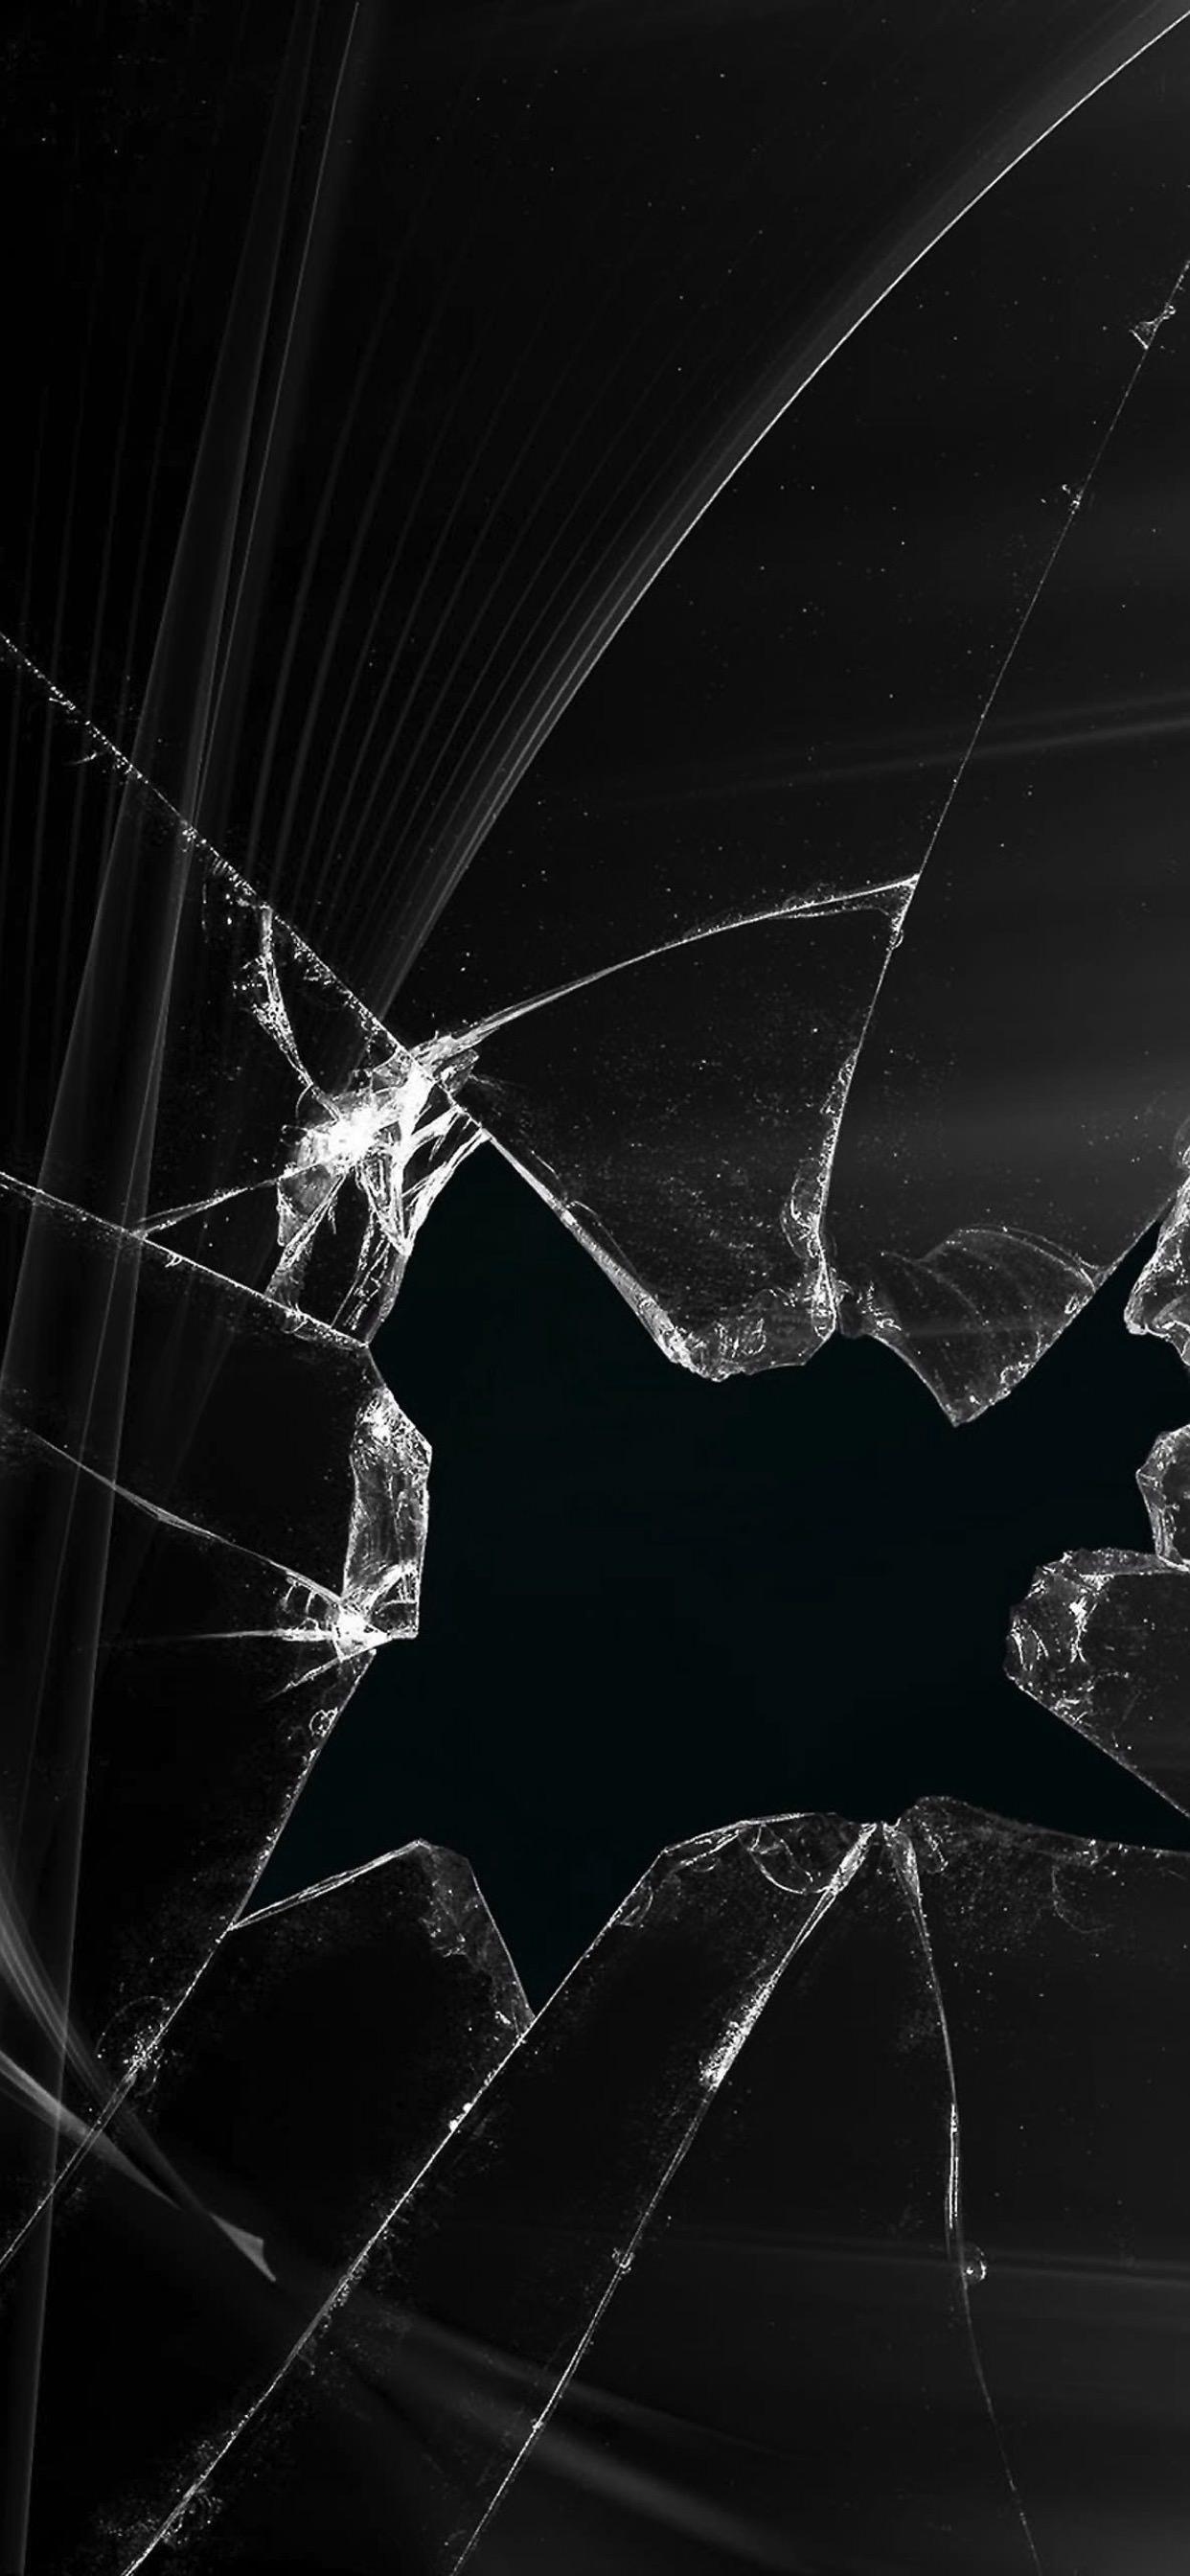 Glass is cracked display screen black. wallpaper.sc iPhone